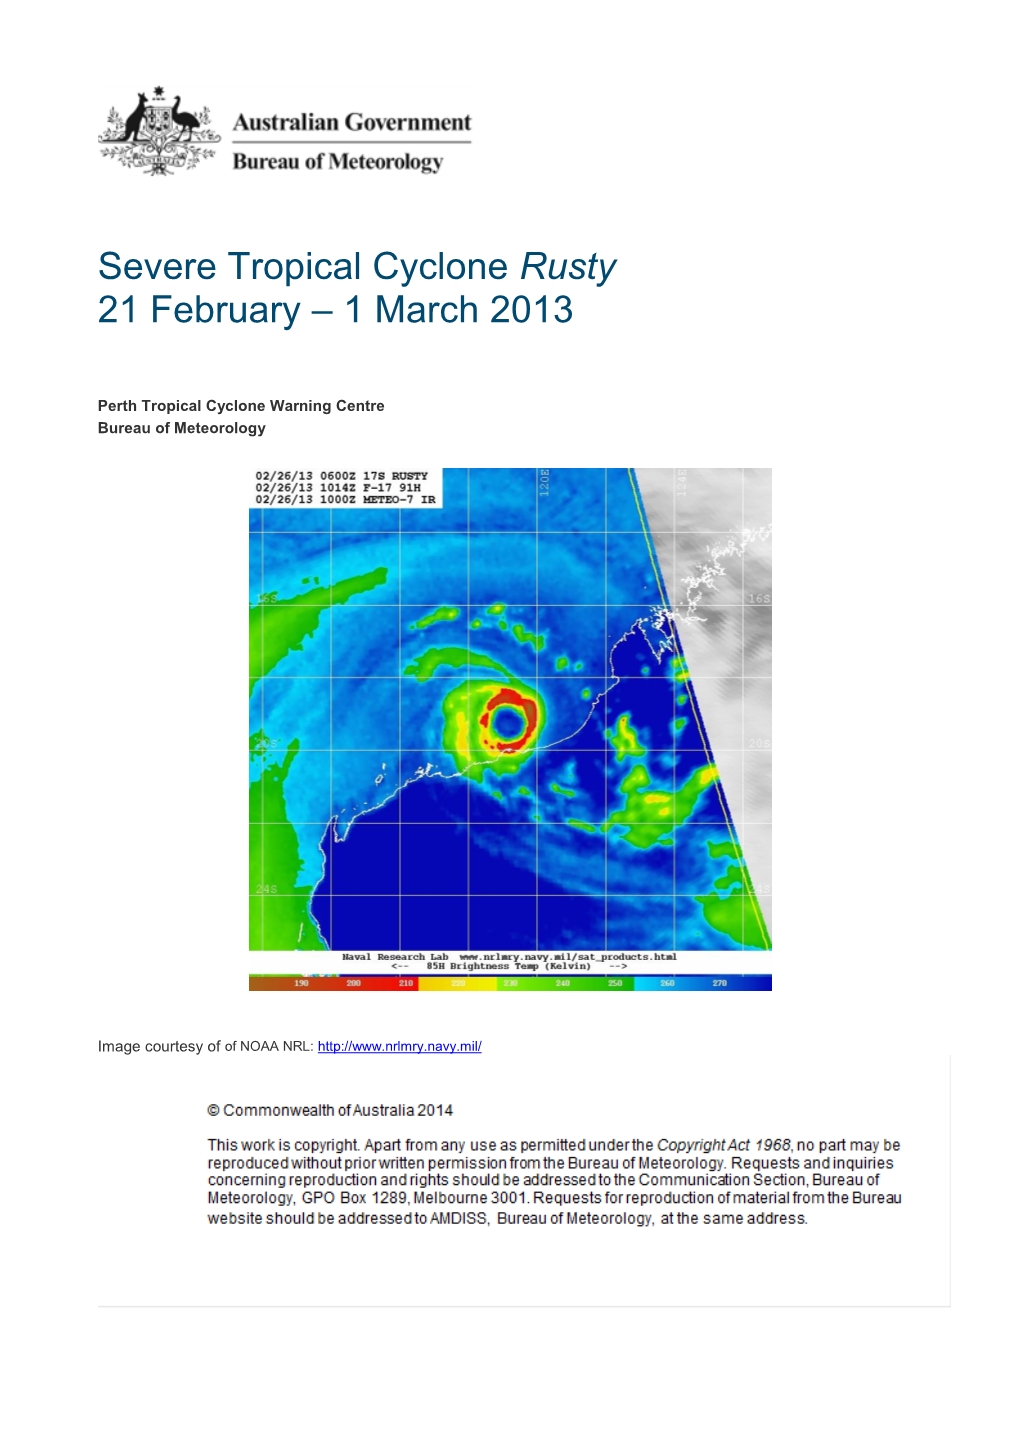 Severe Tropical Cyclone Rusty 21 February – 1 March 2013